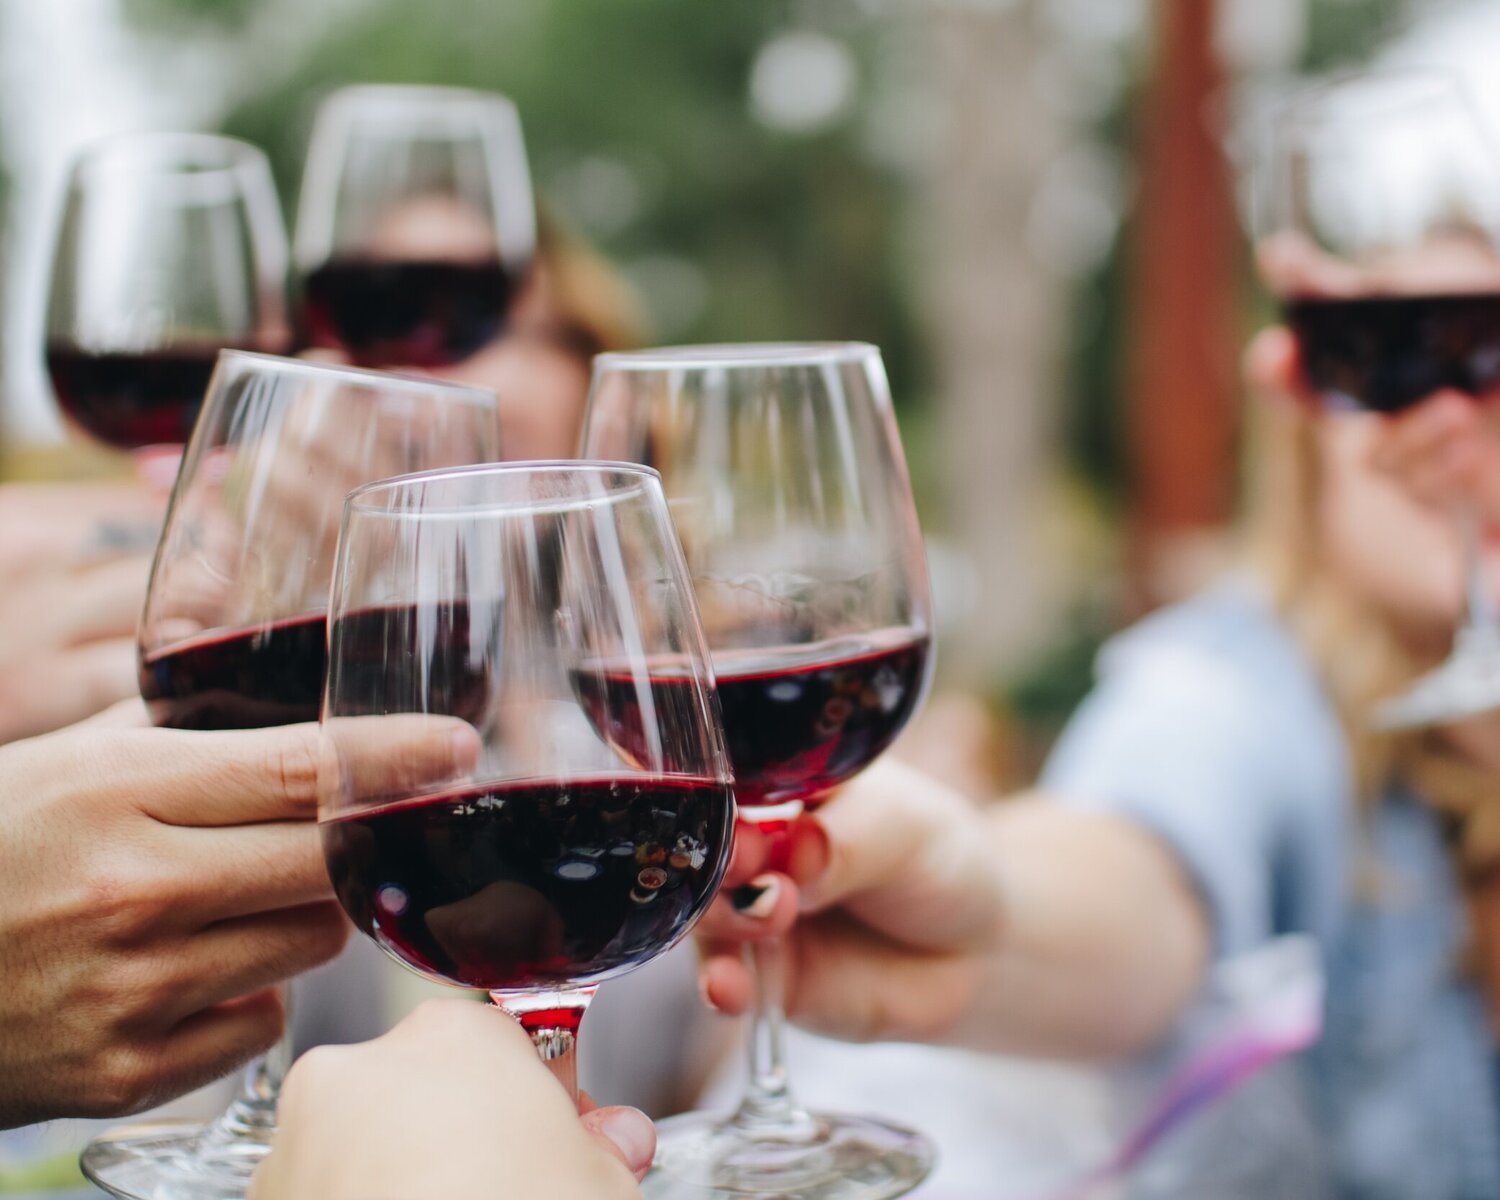 Drinking alcoholic beverages, including red wine, is often a hot flash trigger for women.